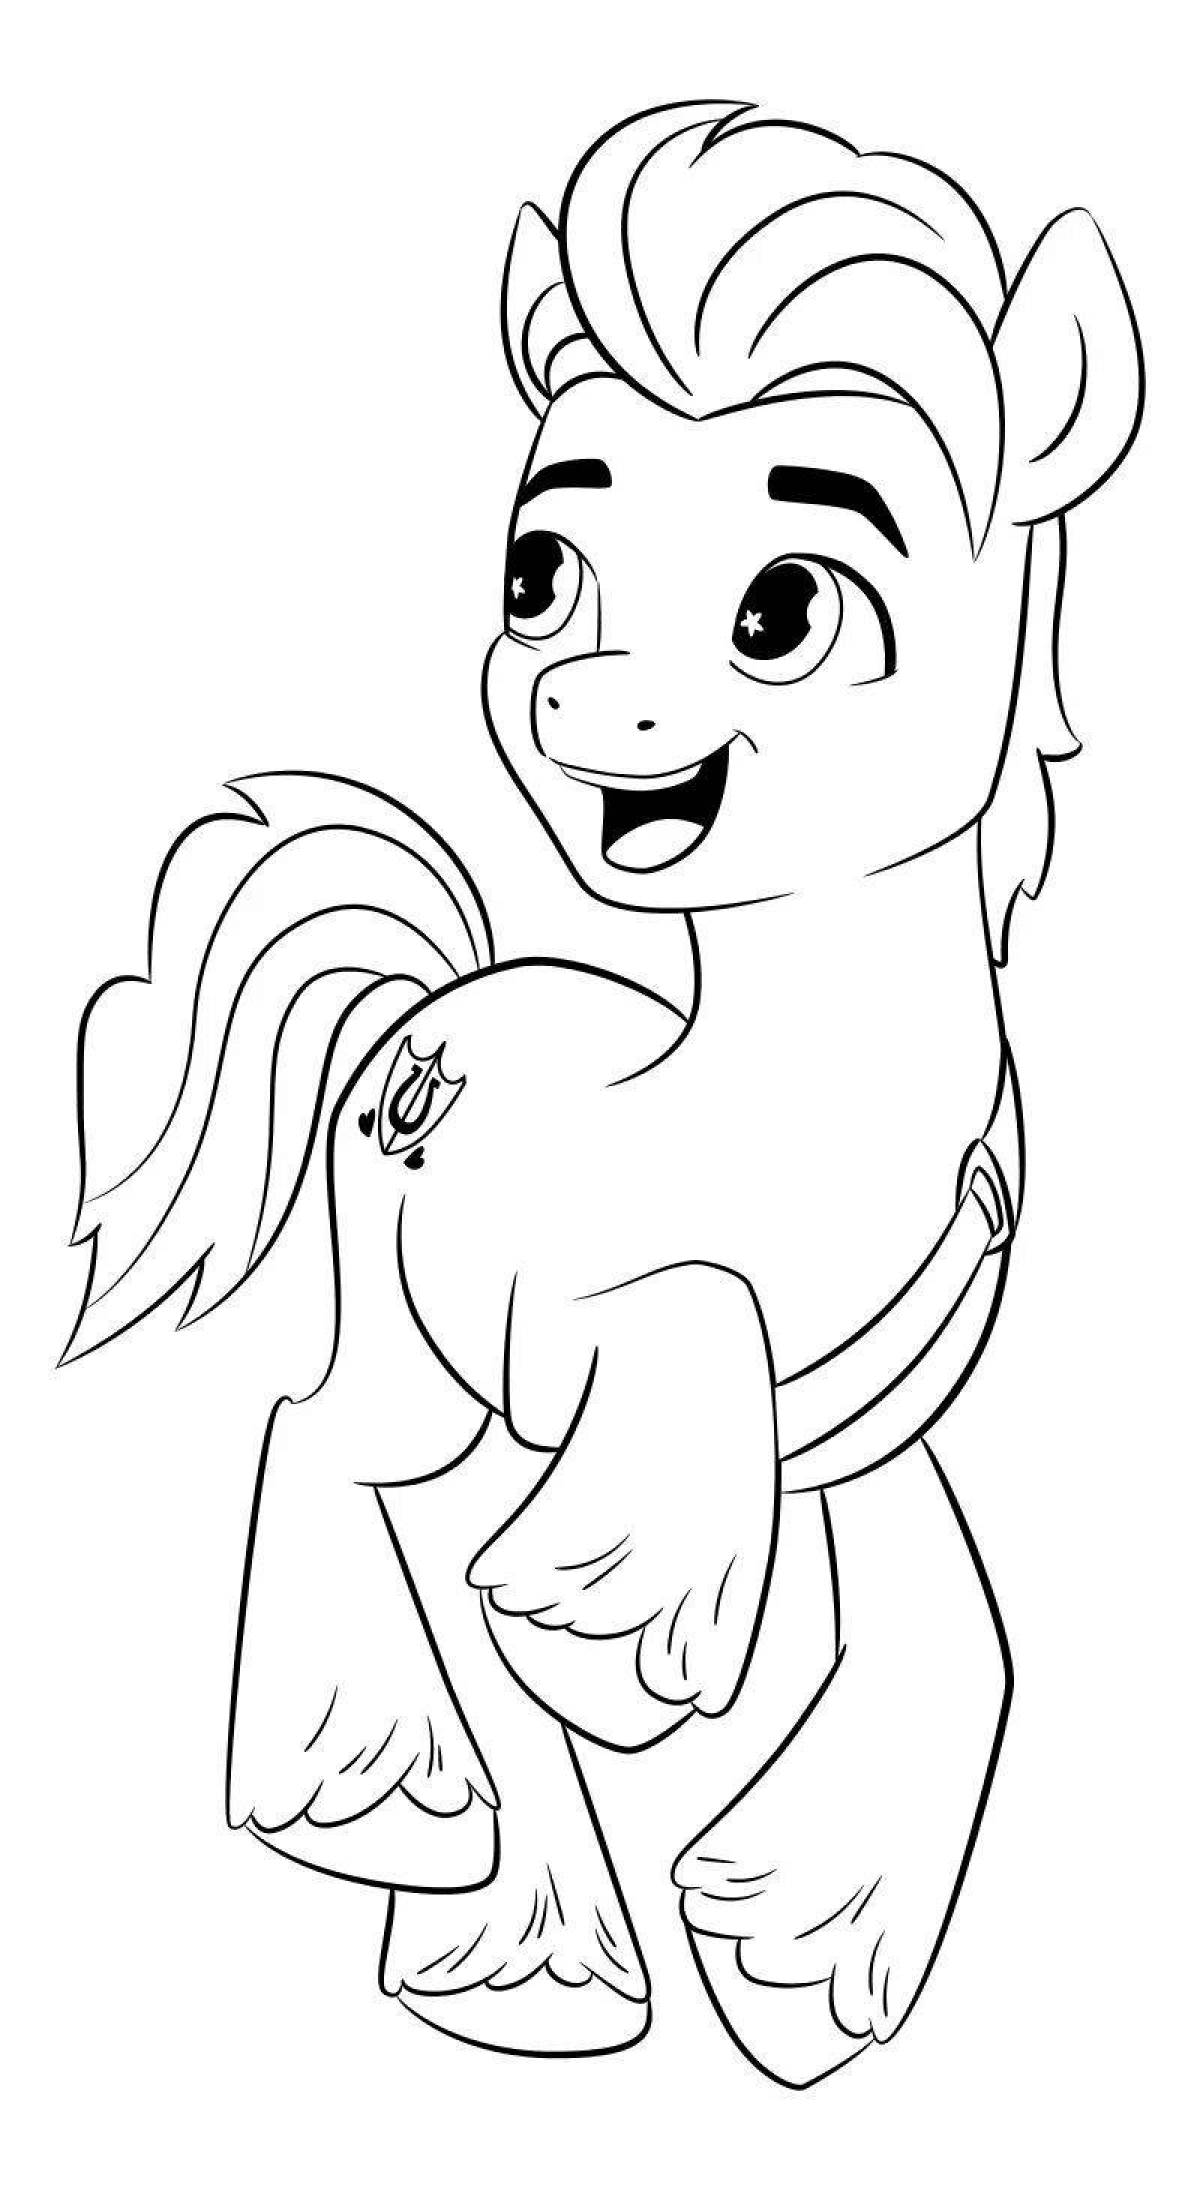 Bright pip pony coloring page